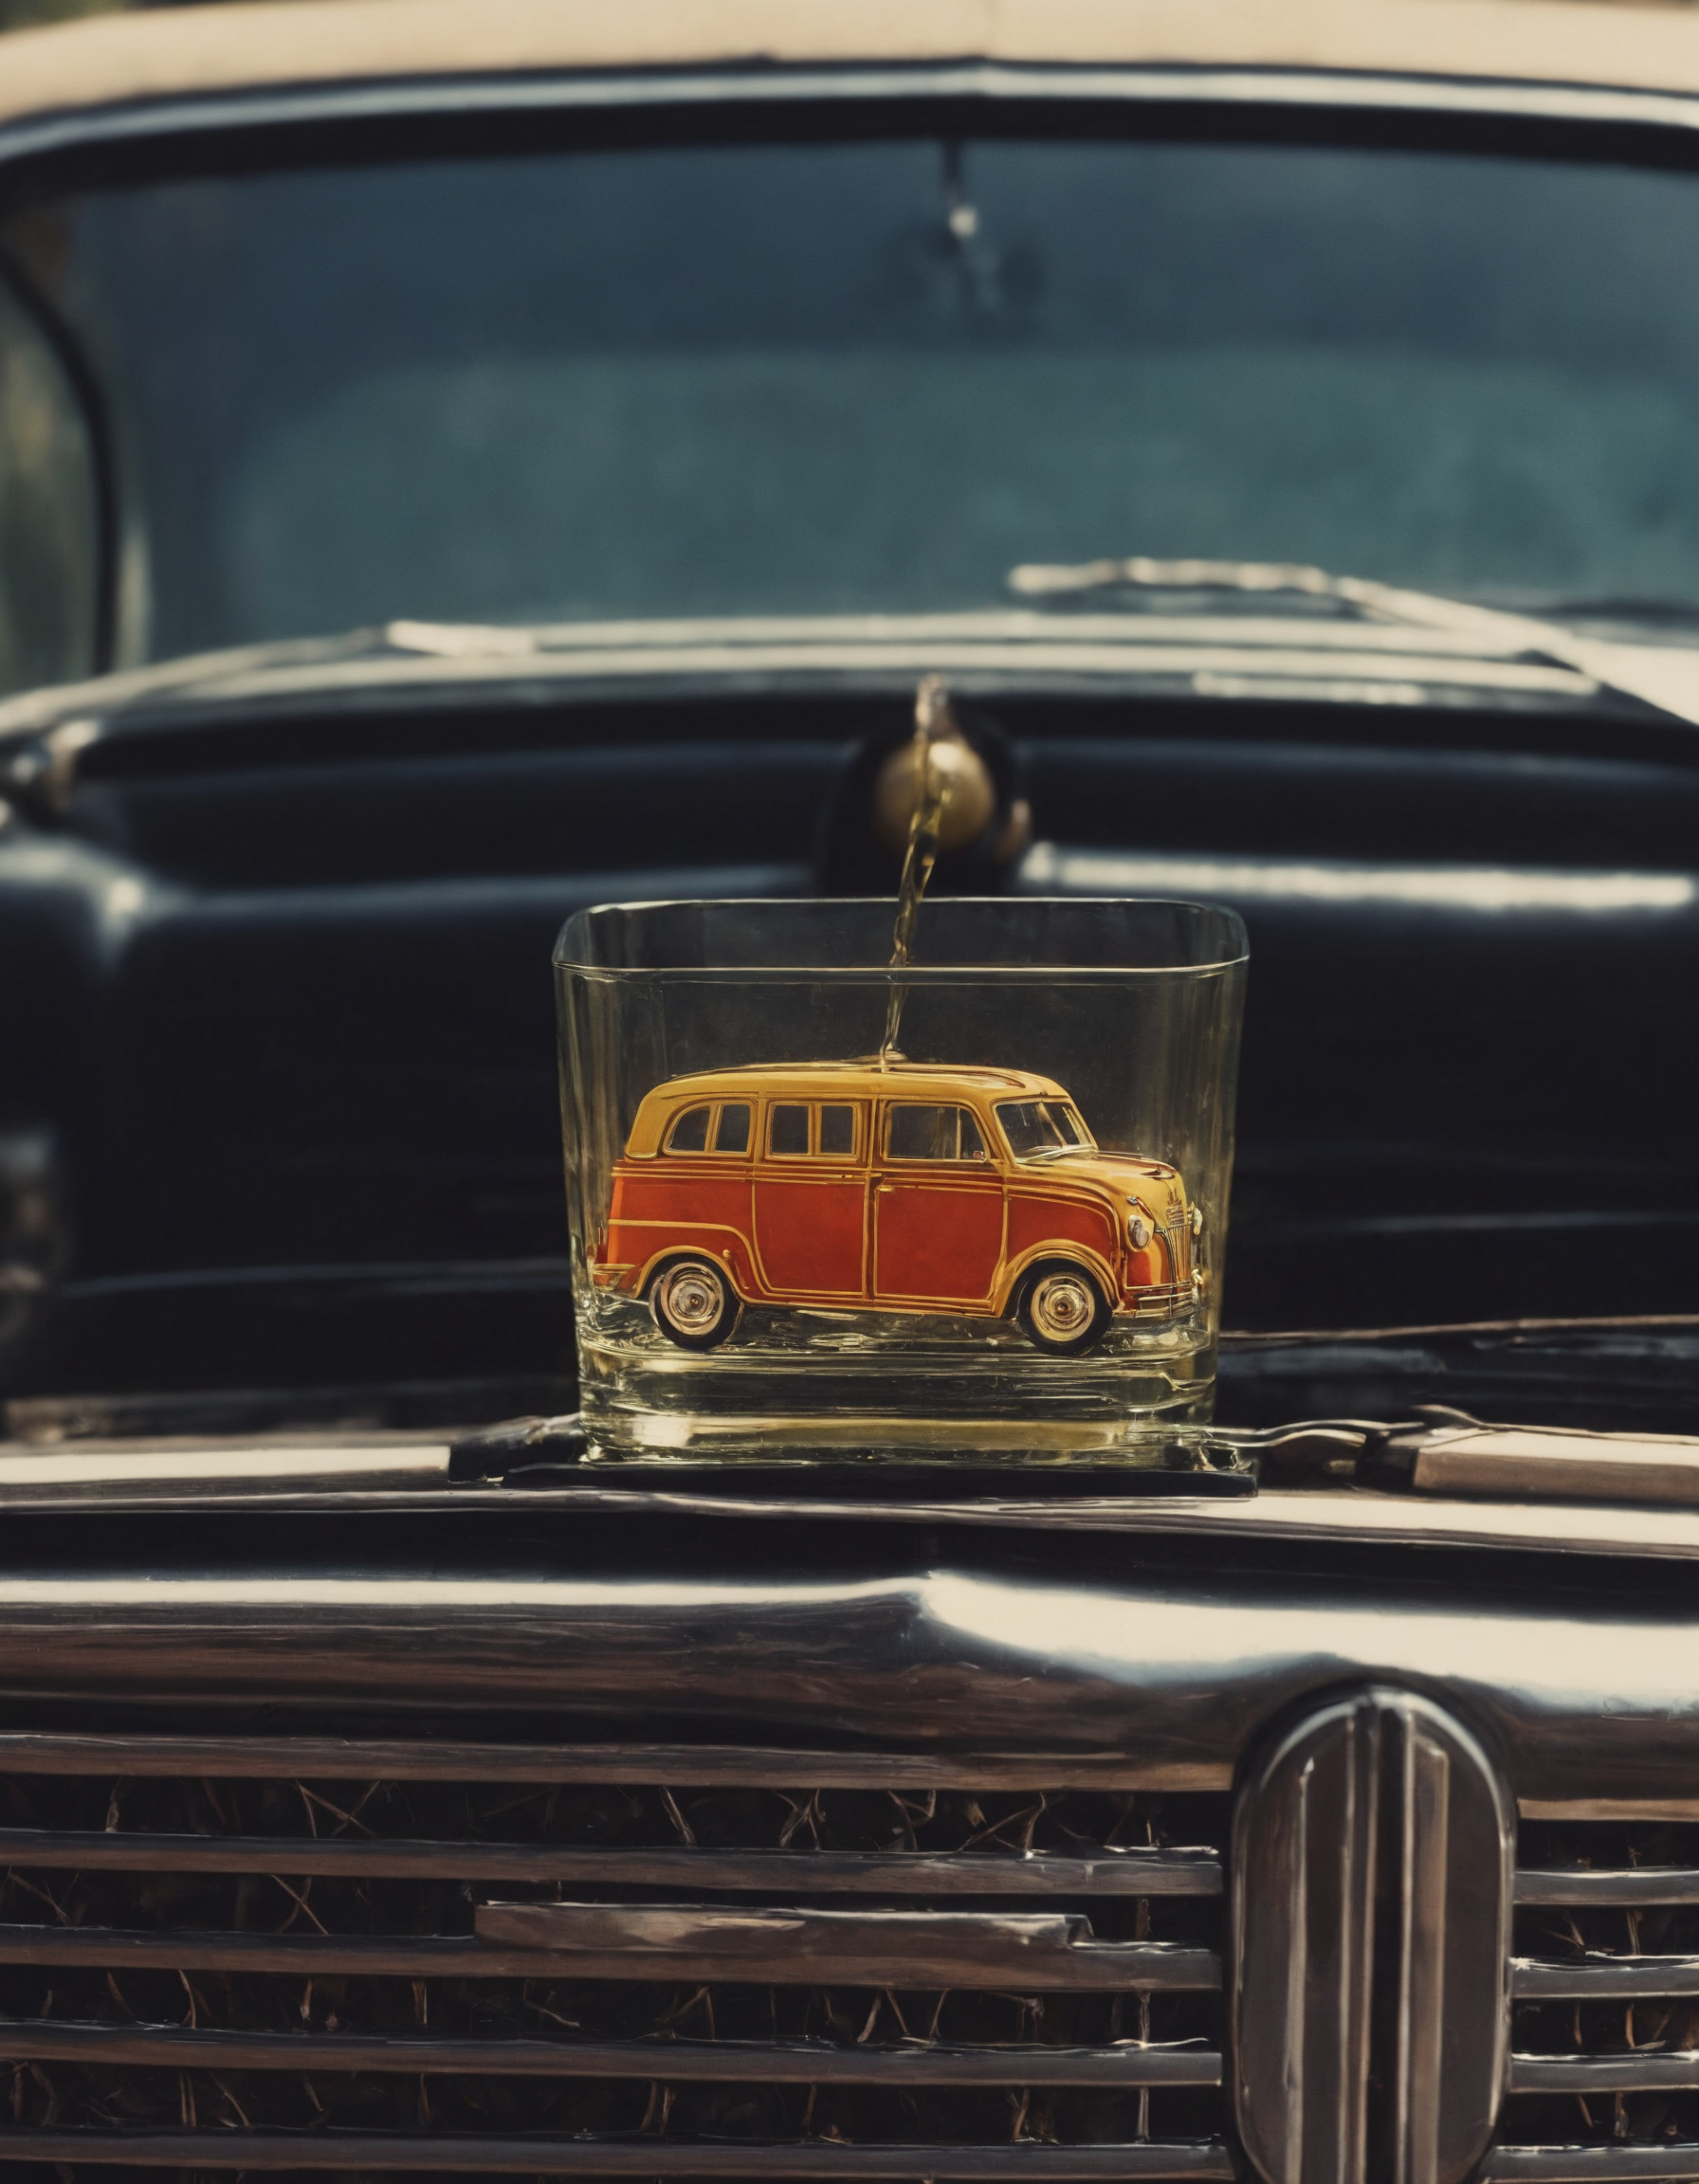 Close-up of a whiskey glass with an etching of a vintage station wagon, positioned in front of a classic car grille, symbolizing the intersection of alcohol and driving for a blog post on federal-government-to-mandate-anti-drunk-driving technology in vehicles.